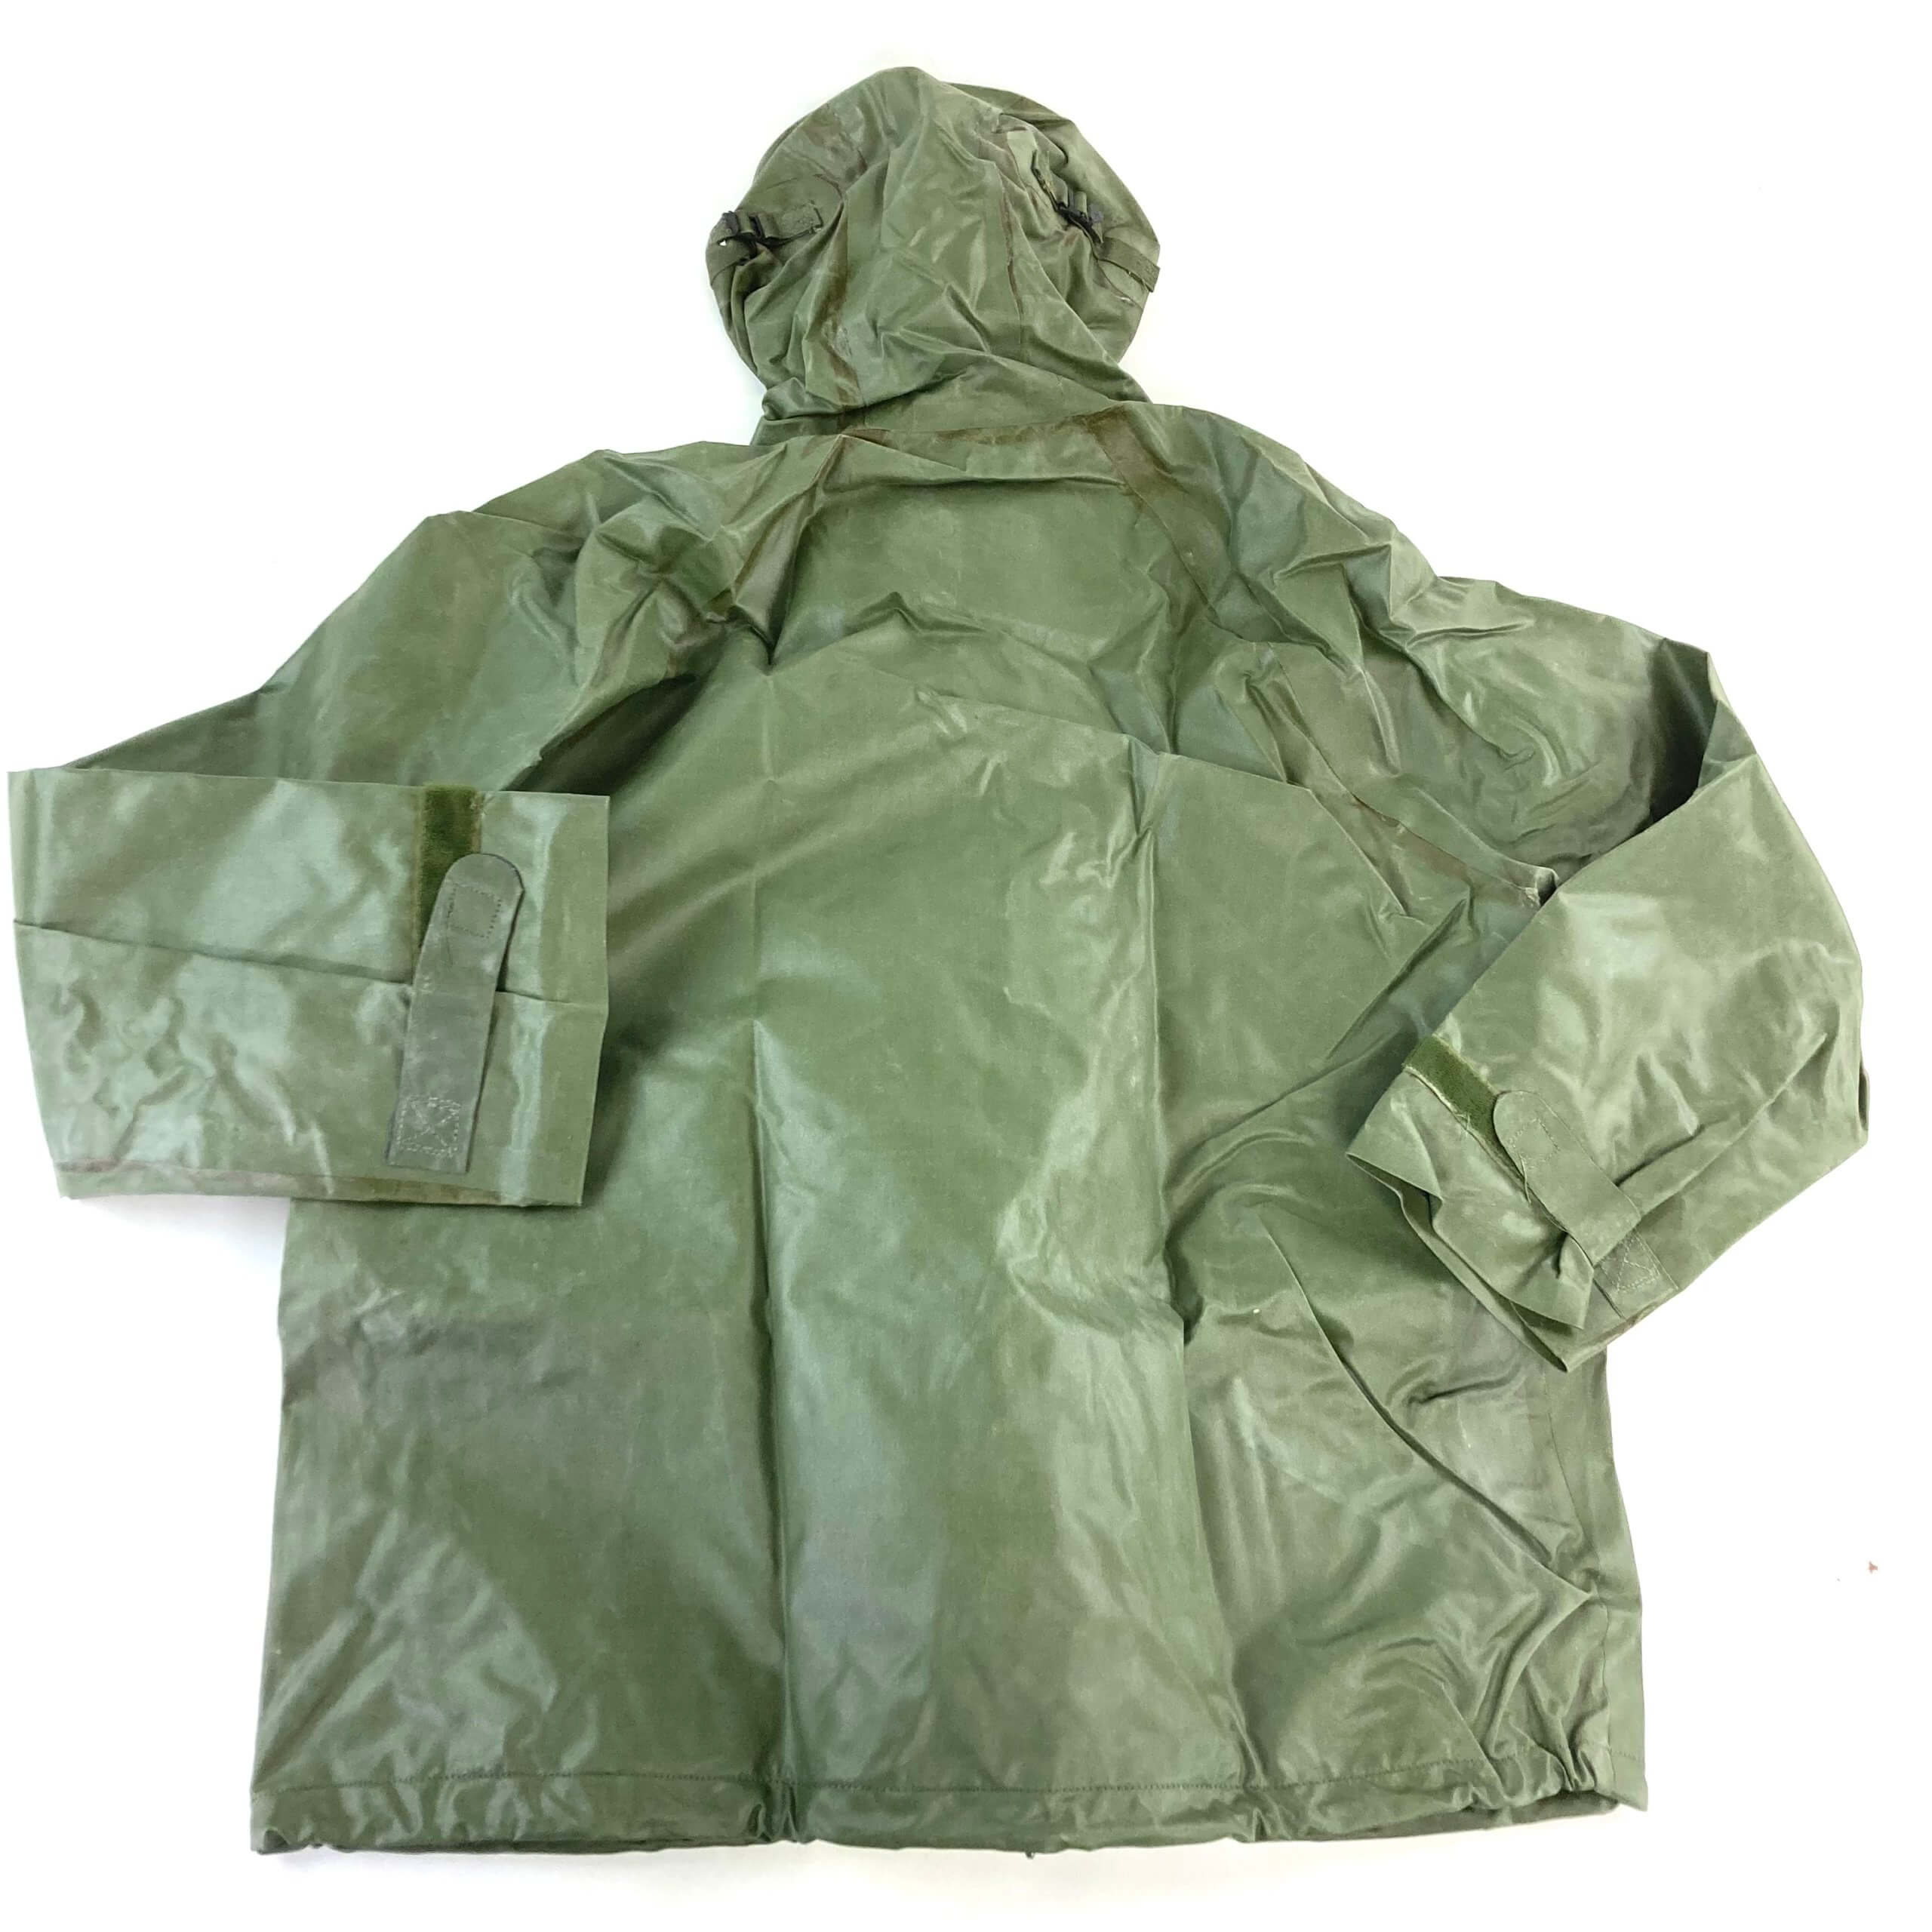 Army Waterproof Poncho Original Czech Military Protection Suit Glove Leg Cover 